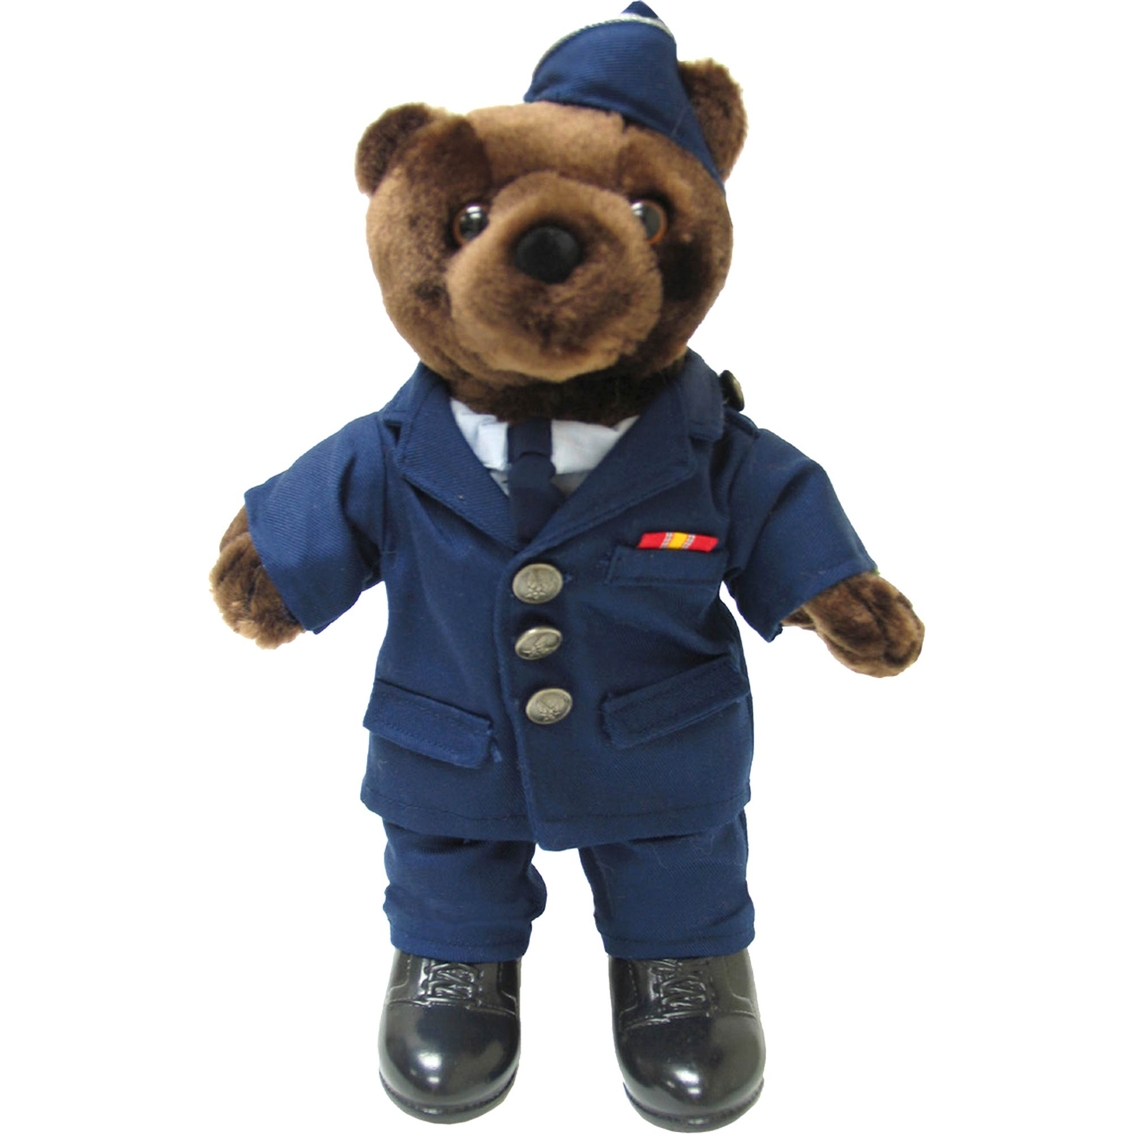 Bear Forces of America 11 in. Plush Bear in Air Force Officer SVC DR Uniform Male